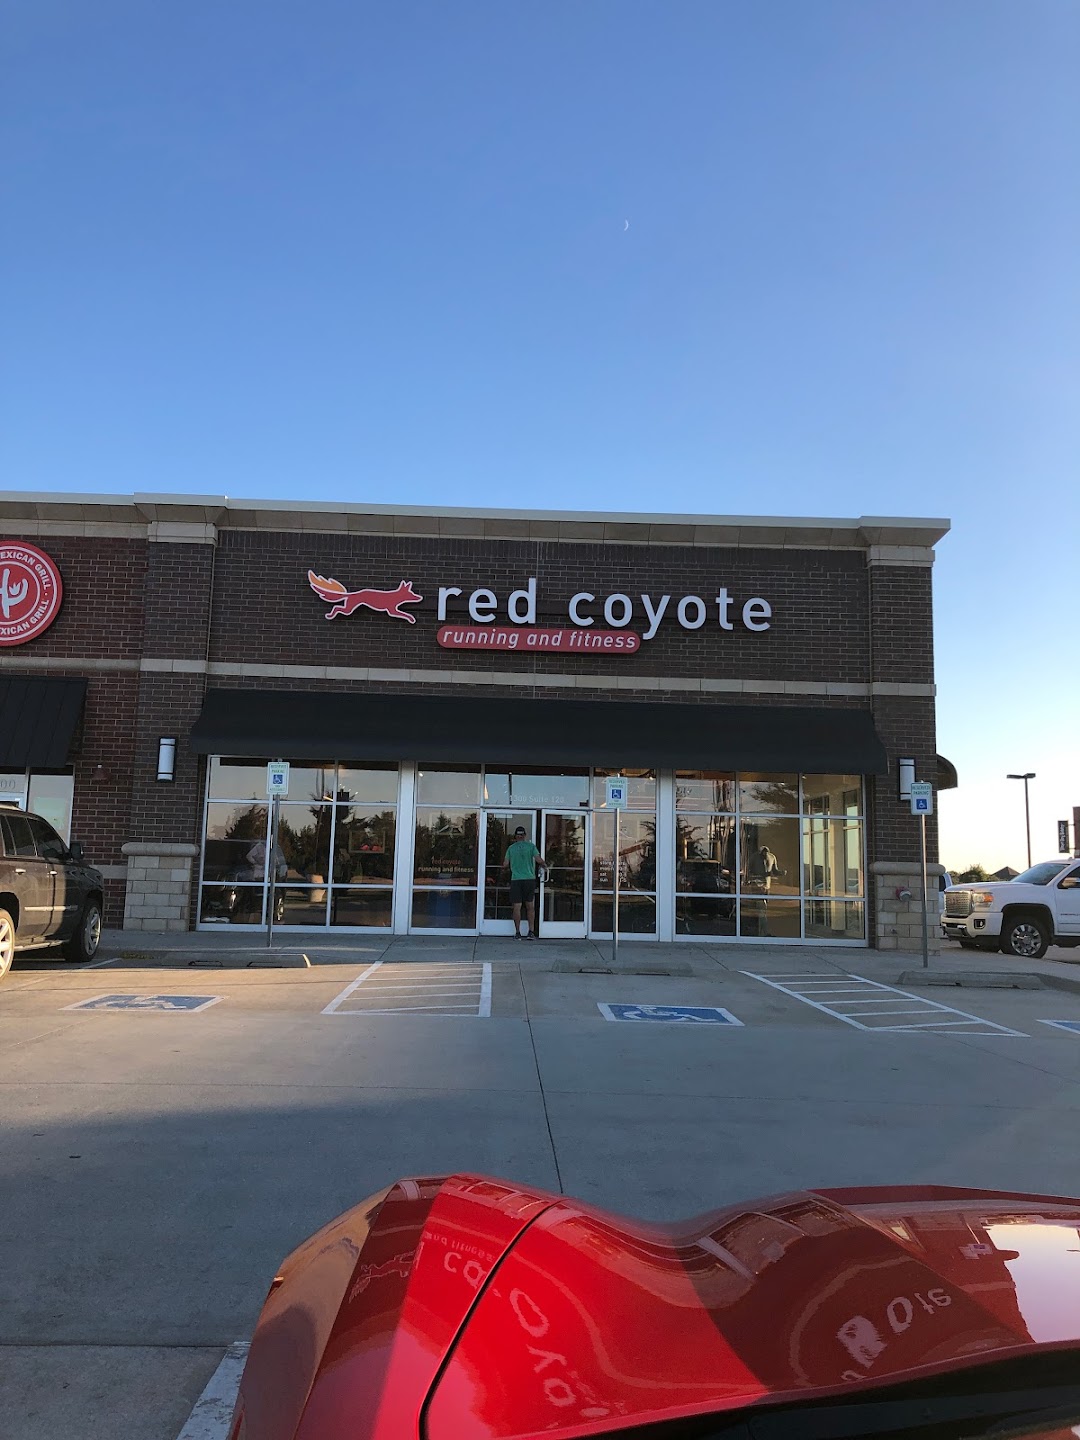 Red Coyote Running and Fitness